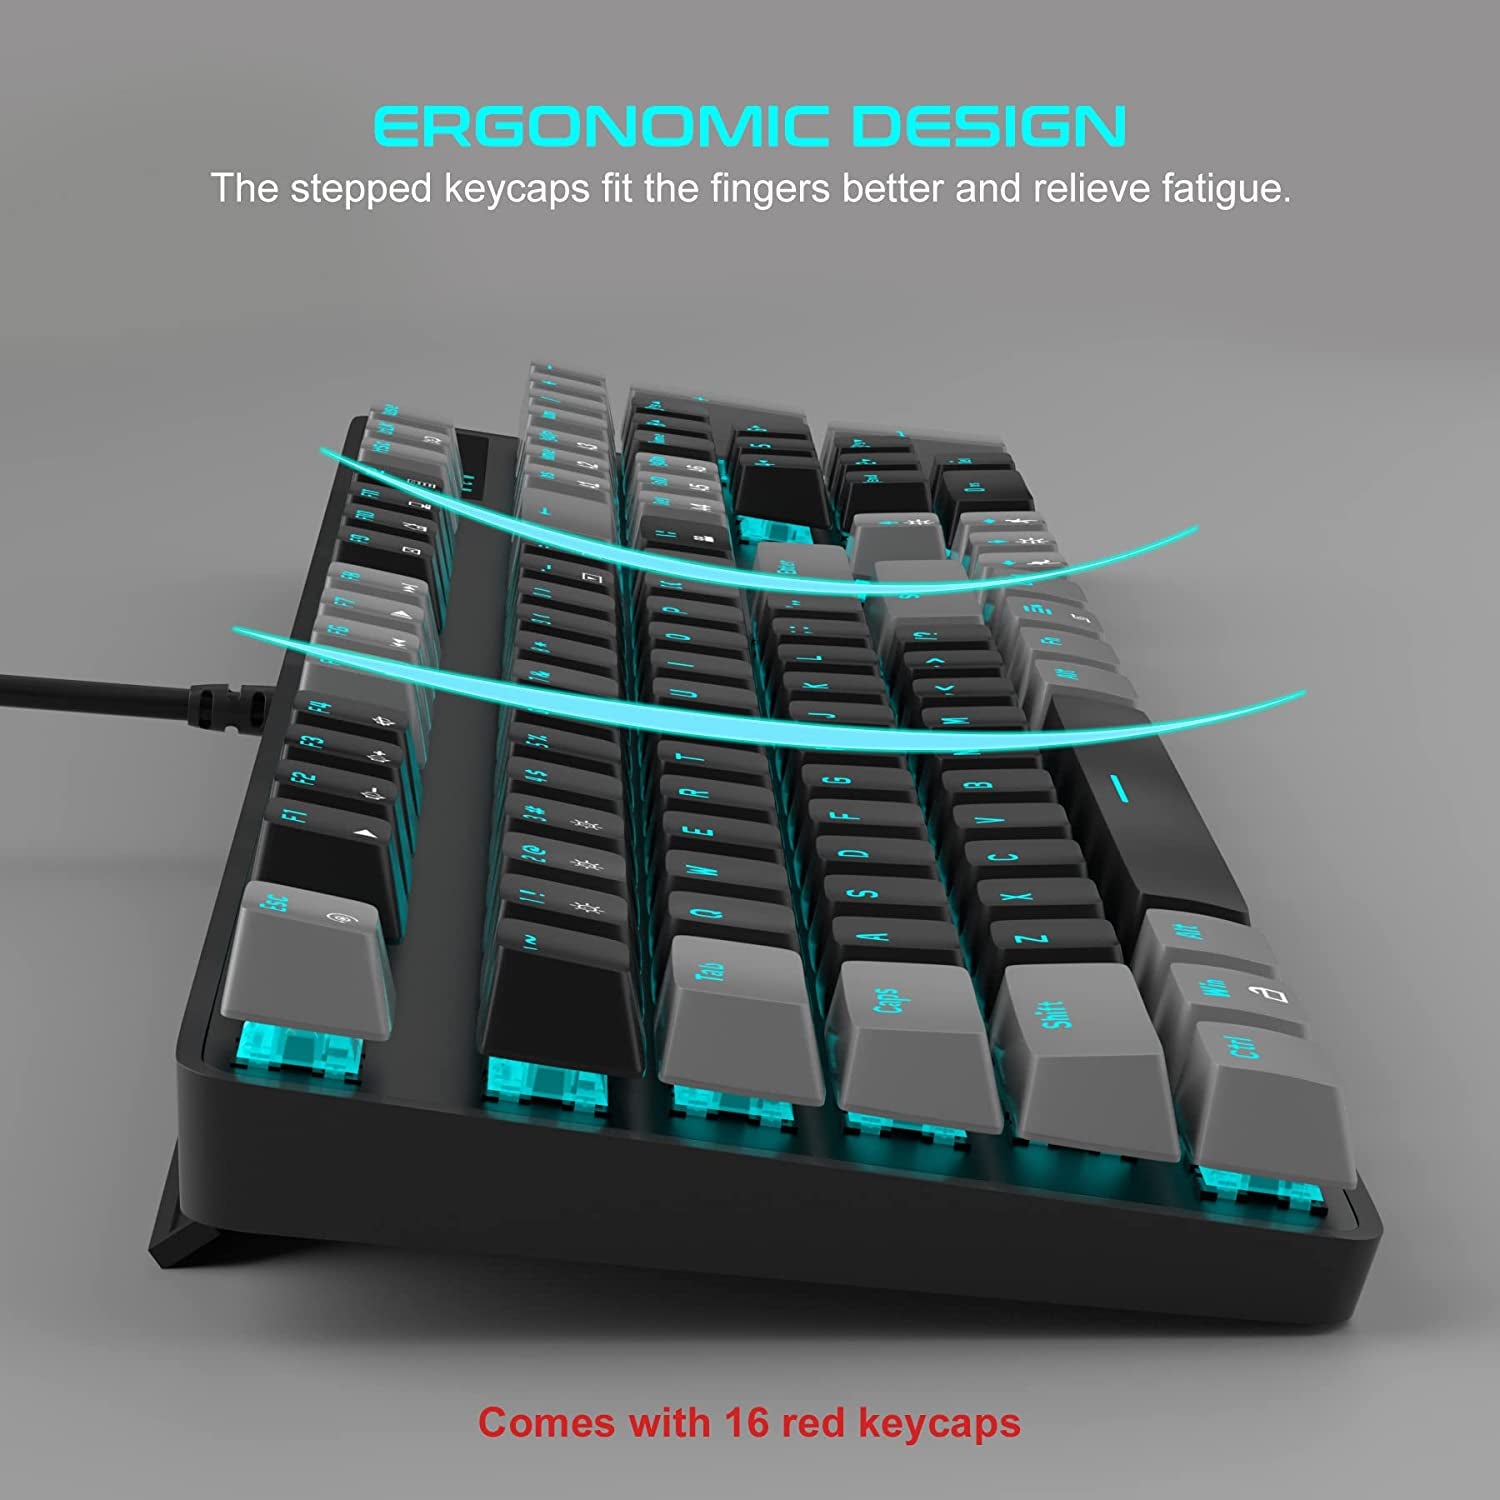 Mechanical Gaming Keyboard, 104 Keys Blue Backlit Keyboard with Red Switches Double-Shot Keycaps, USB Wired Mechanical Computer Keyboard for Laptop, Desktop, PC Gamers(Gray & Black)